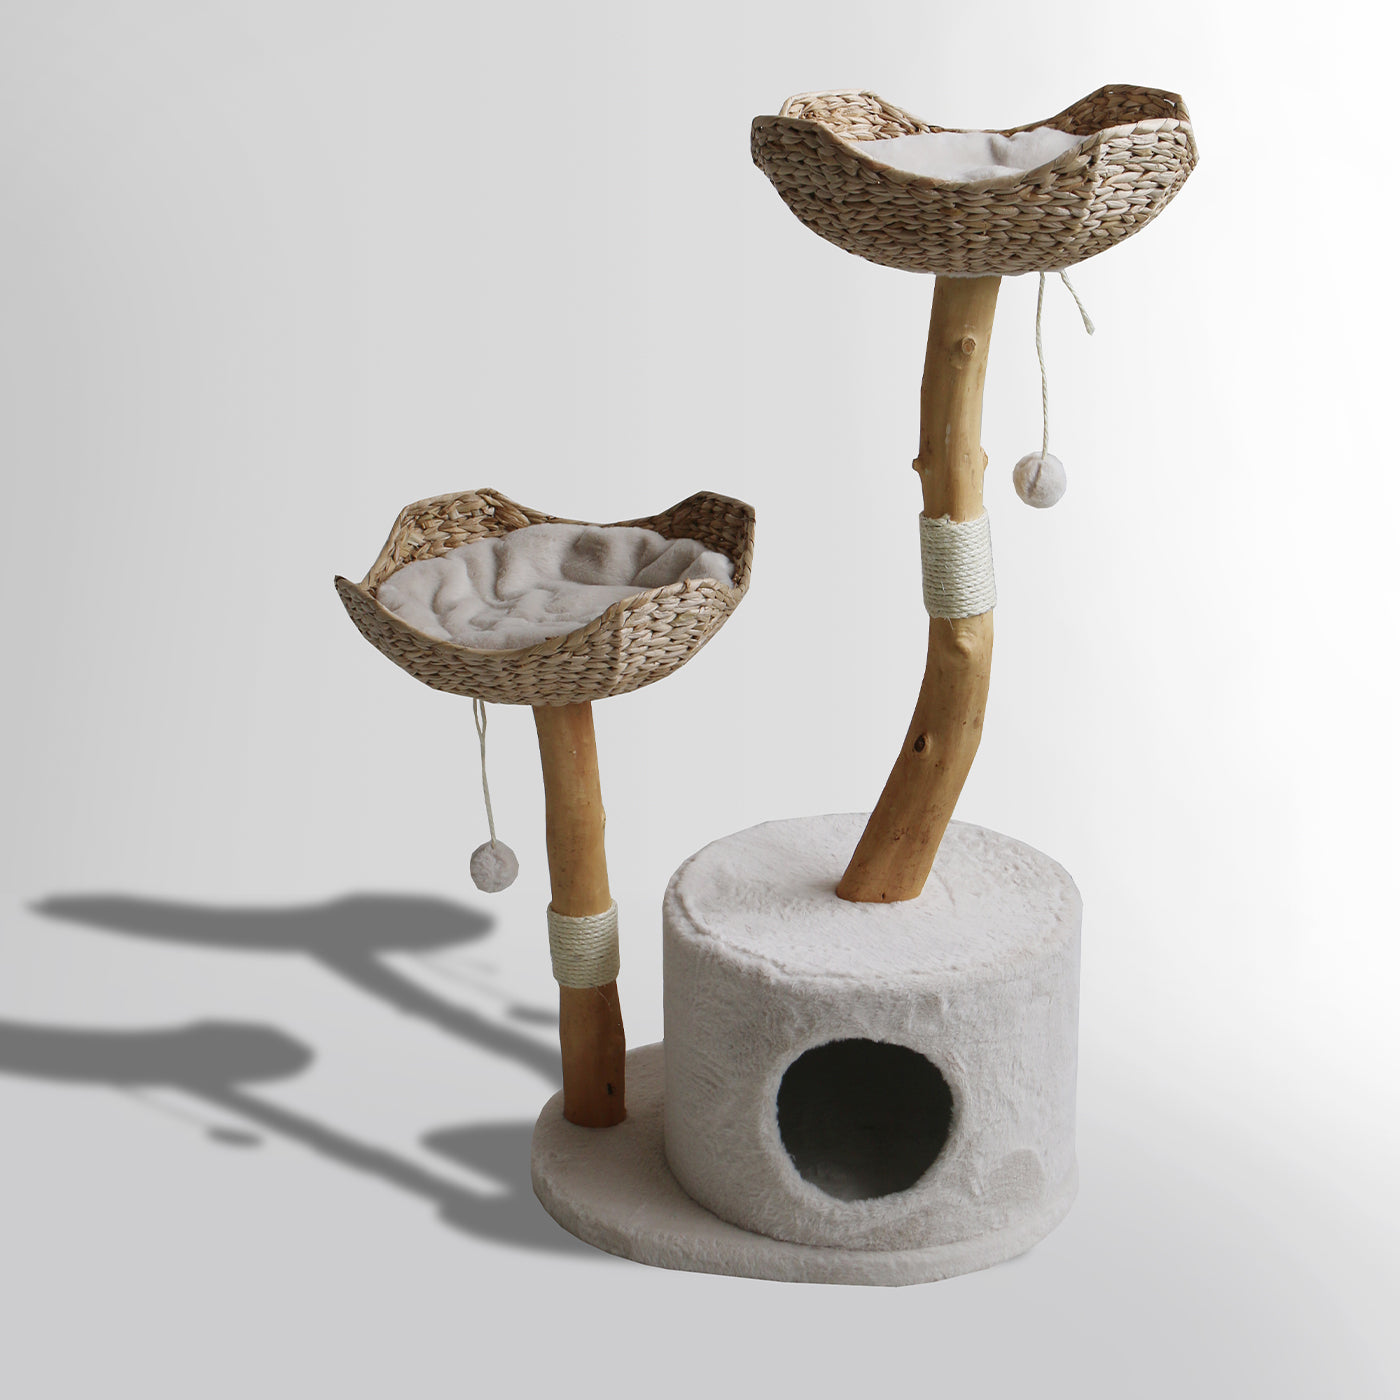 Discover our Luxury Back to Nature The Basket Cat Scratch Post. The Features of the Cat Scratch Post include Cosy Basket, Cave for Sleeping & Dangling Toys to Encourage Play. The Perfect Burrow For Your Kitten and Cat, Weight Limit 20kg, Available Now at Lords & Labradors